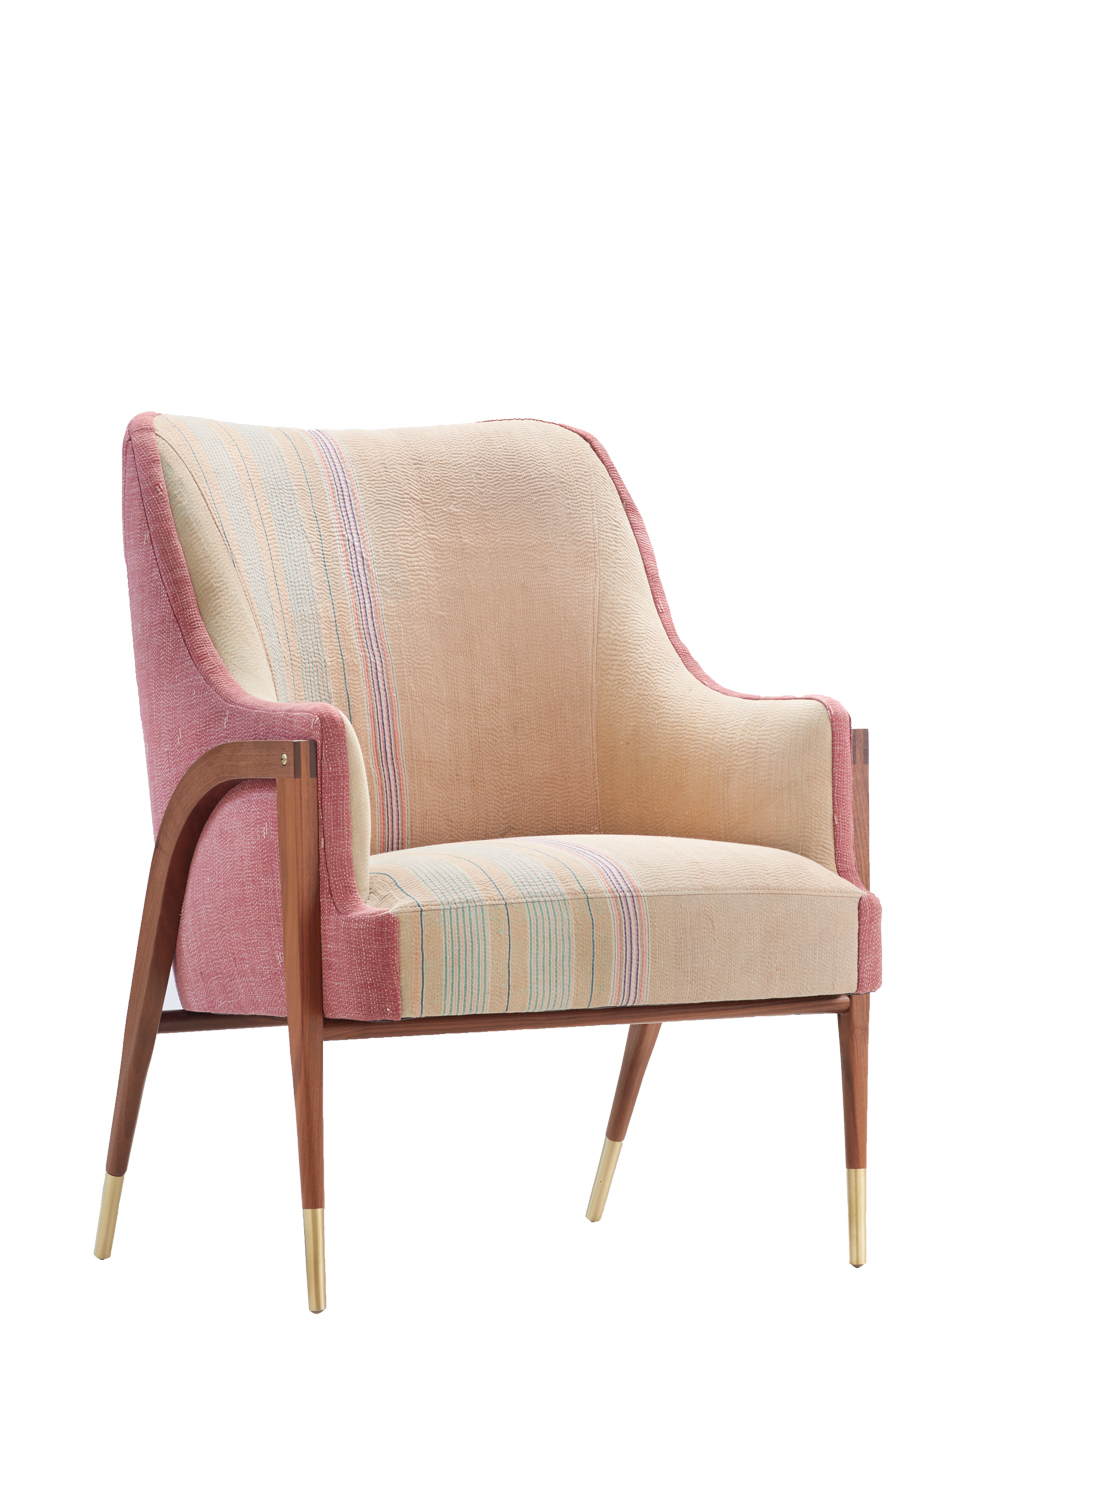 Colorful repurposed vintage textile upholsters an armchair with slender wooden legs from new Aloka collection